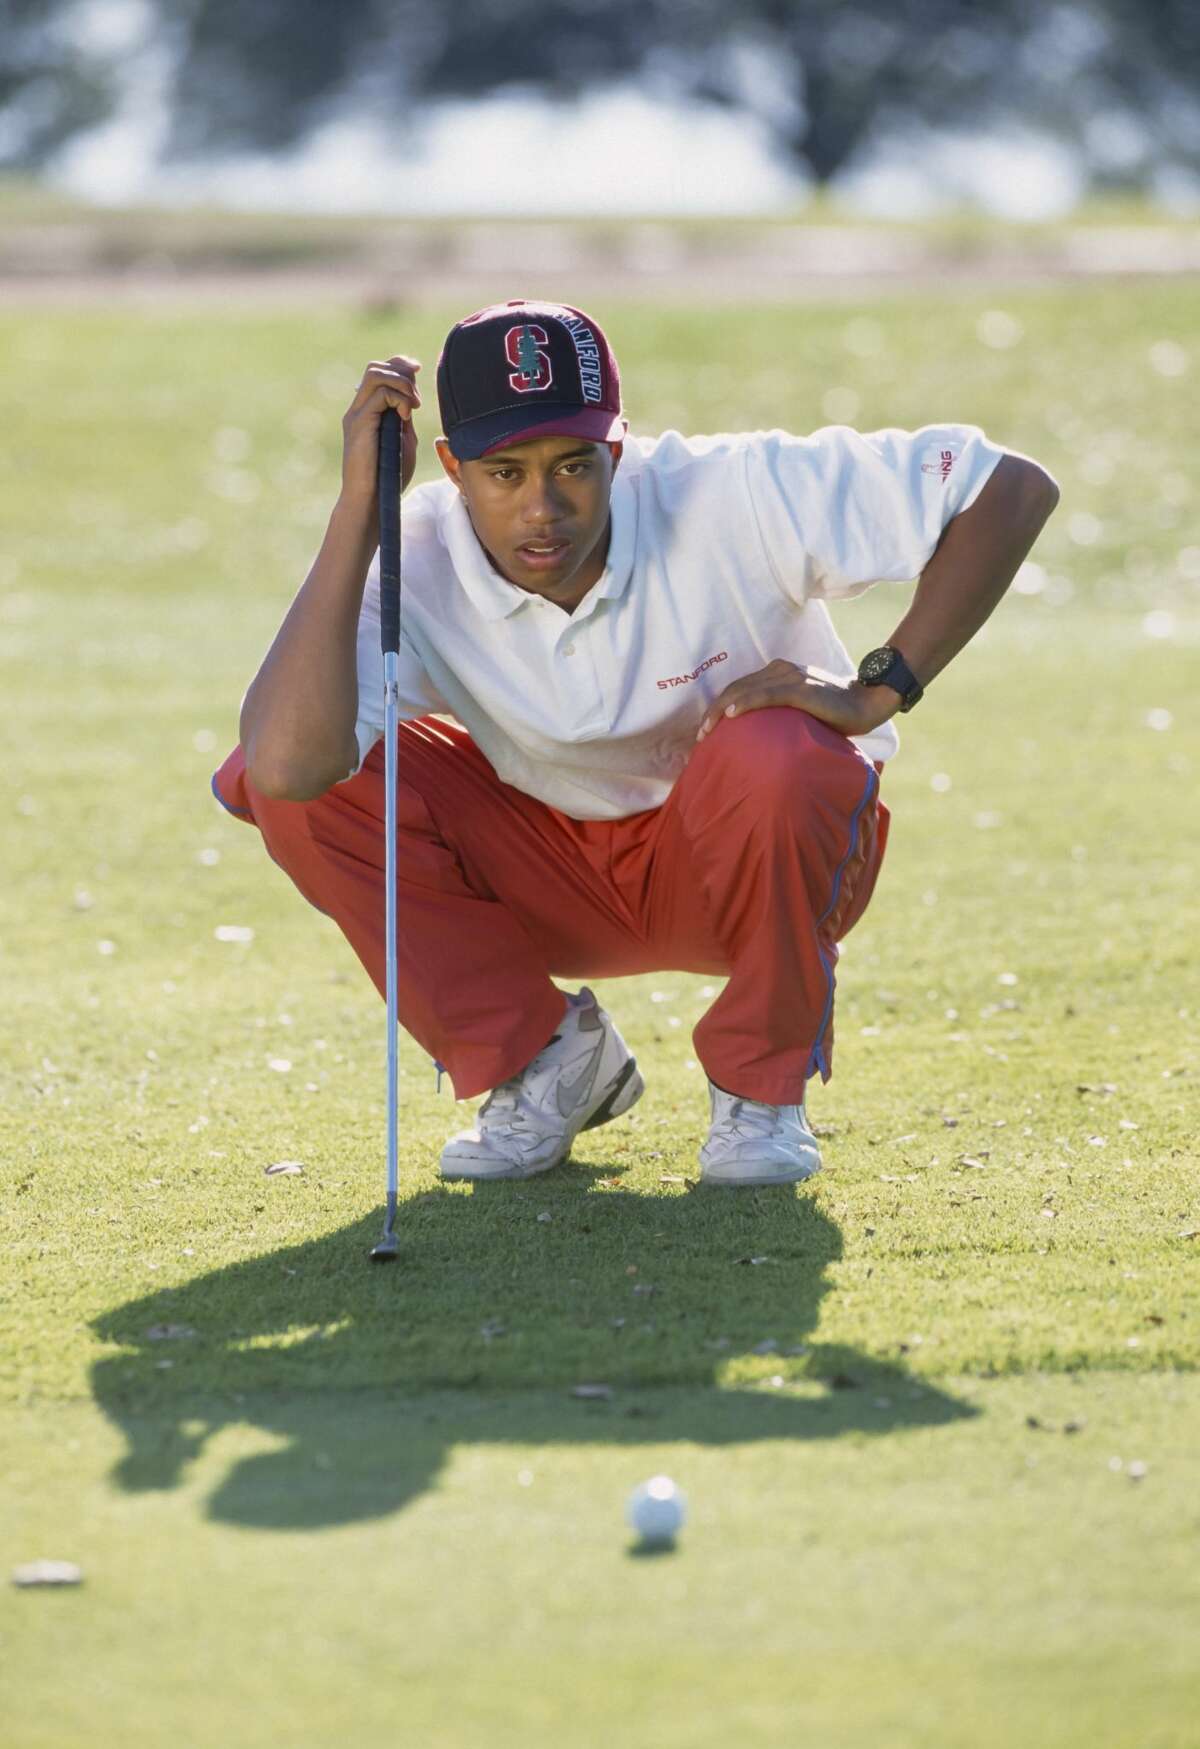 Tiger Woods:  (golfer) Major: Economics  Fun fact: Woods played golf at Stanford but dropped out after two years and become a pro. 